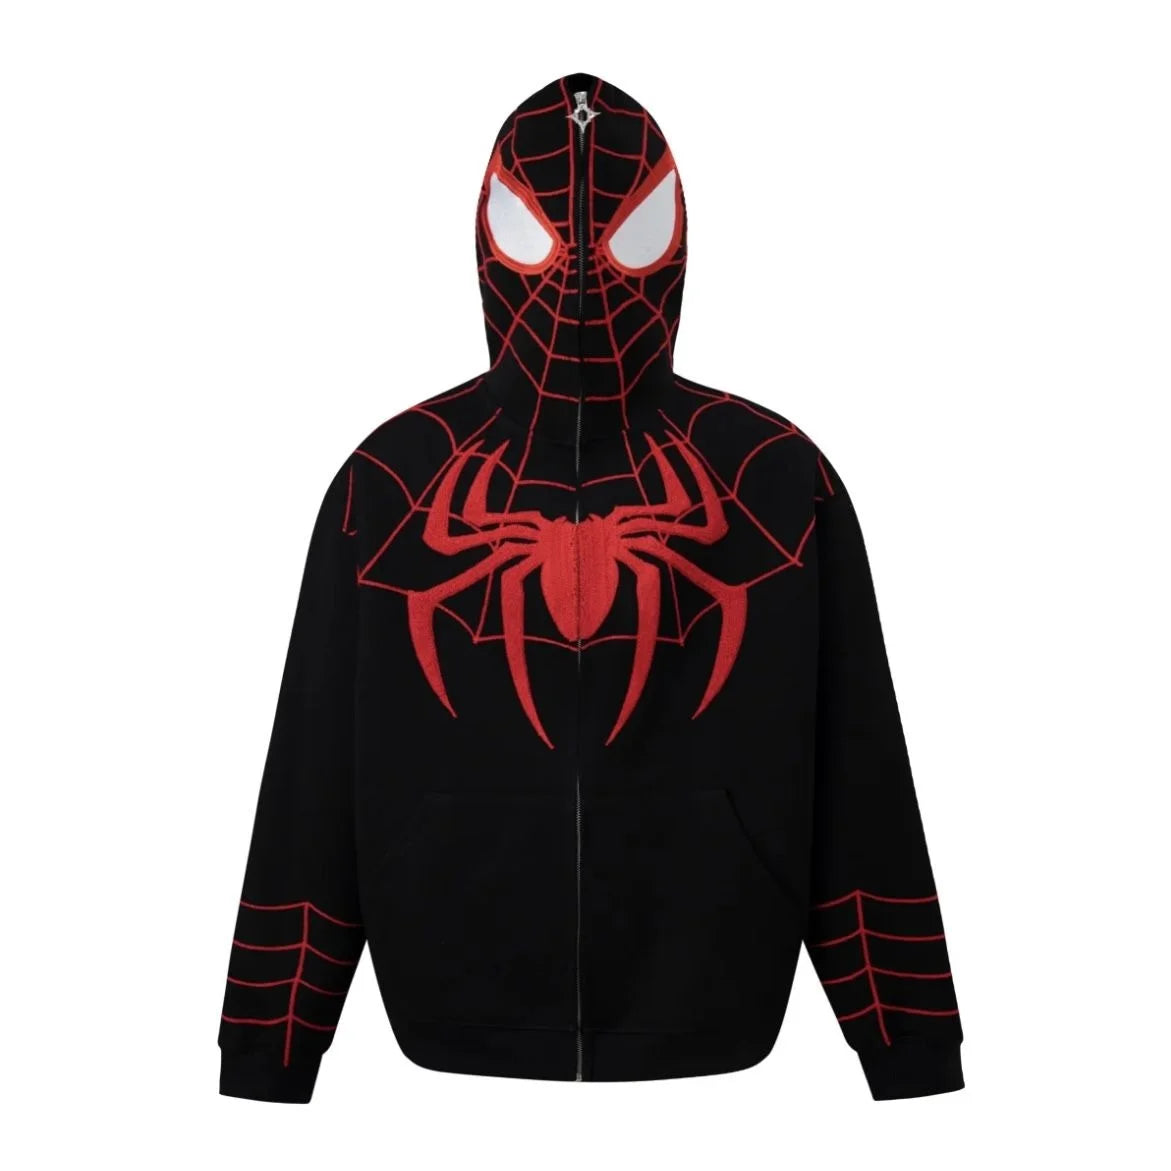 Spider Man Embroidery Design Inspired Zipper Hooded Sweater for Man and Women INS Korean Teens Student Loose Oversize Hoodies